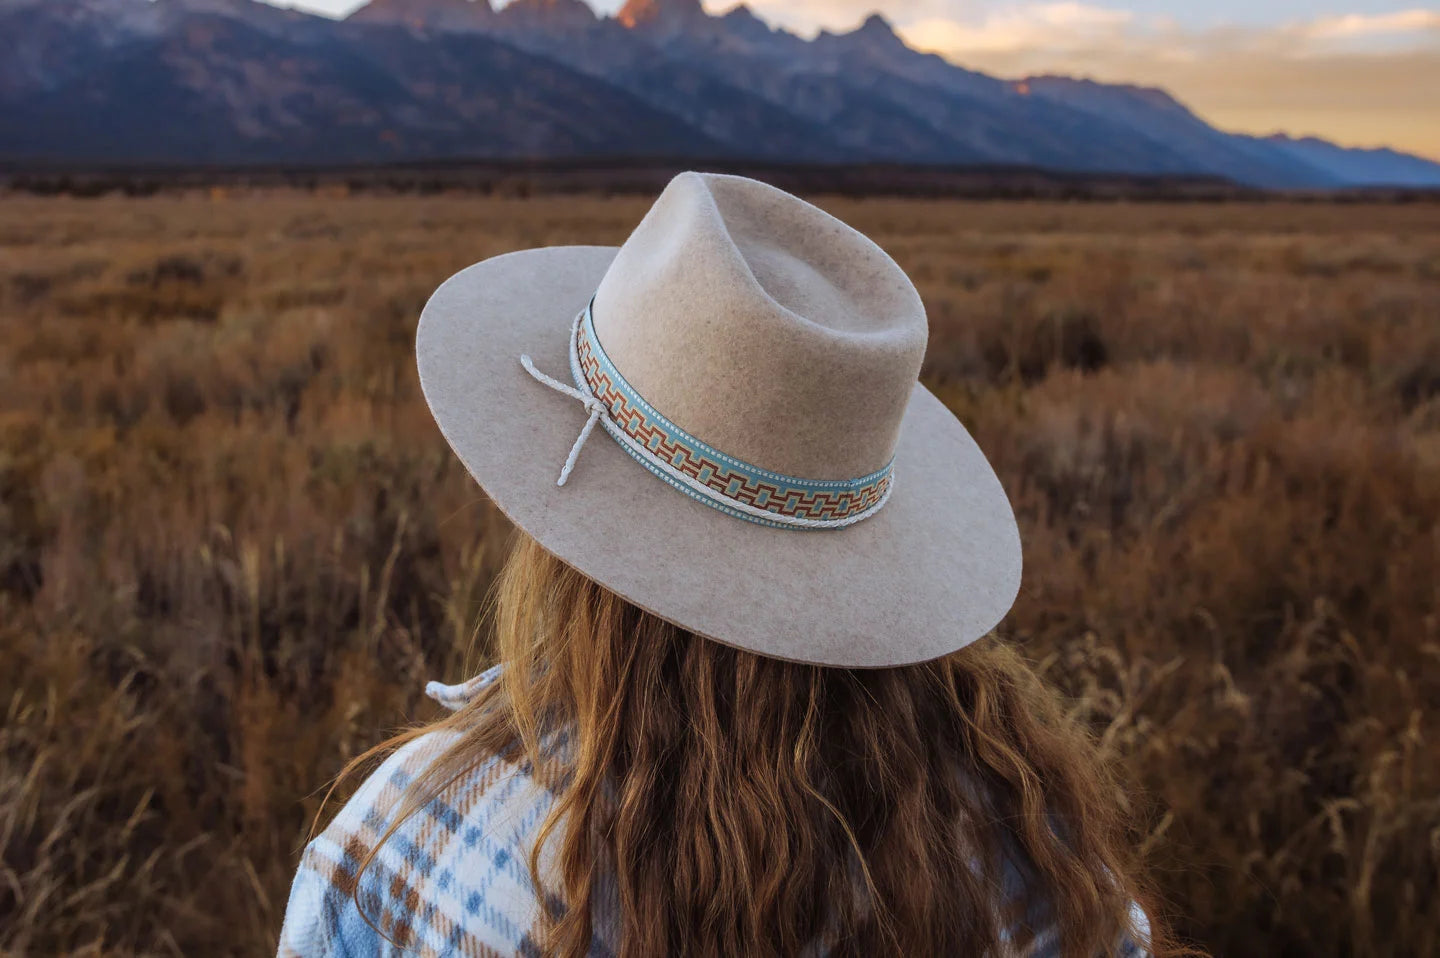 A woman in a field looking towards the mountains wearing a plaid shirt and a felt hat